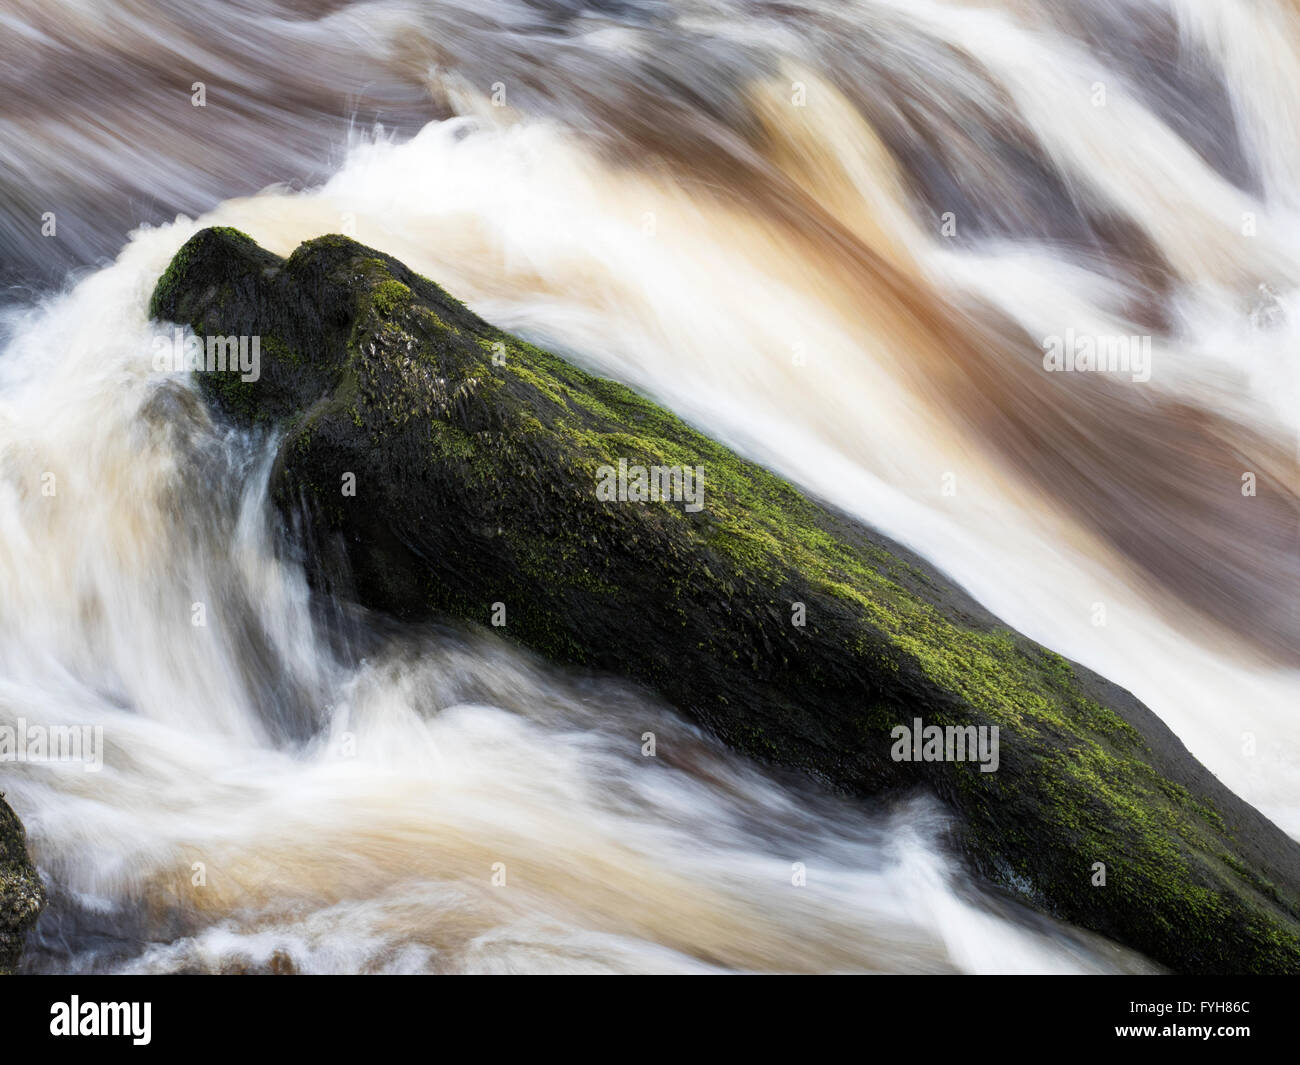 Mossy Rock and Peaty Water at The Strid Bolton Abbey Yorkshire Dales England Stock Photo